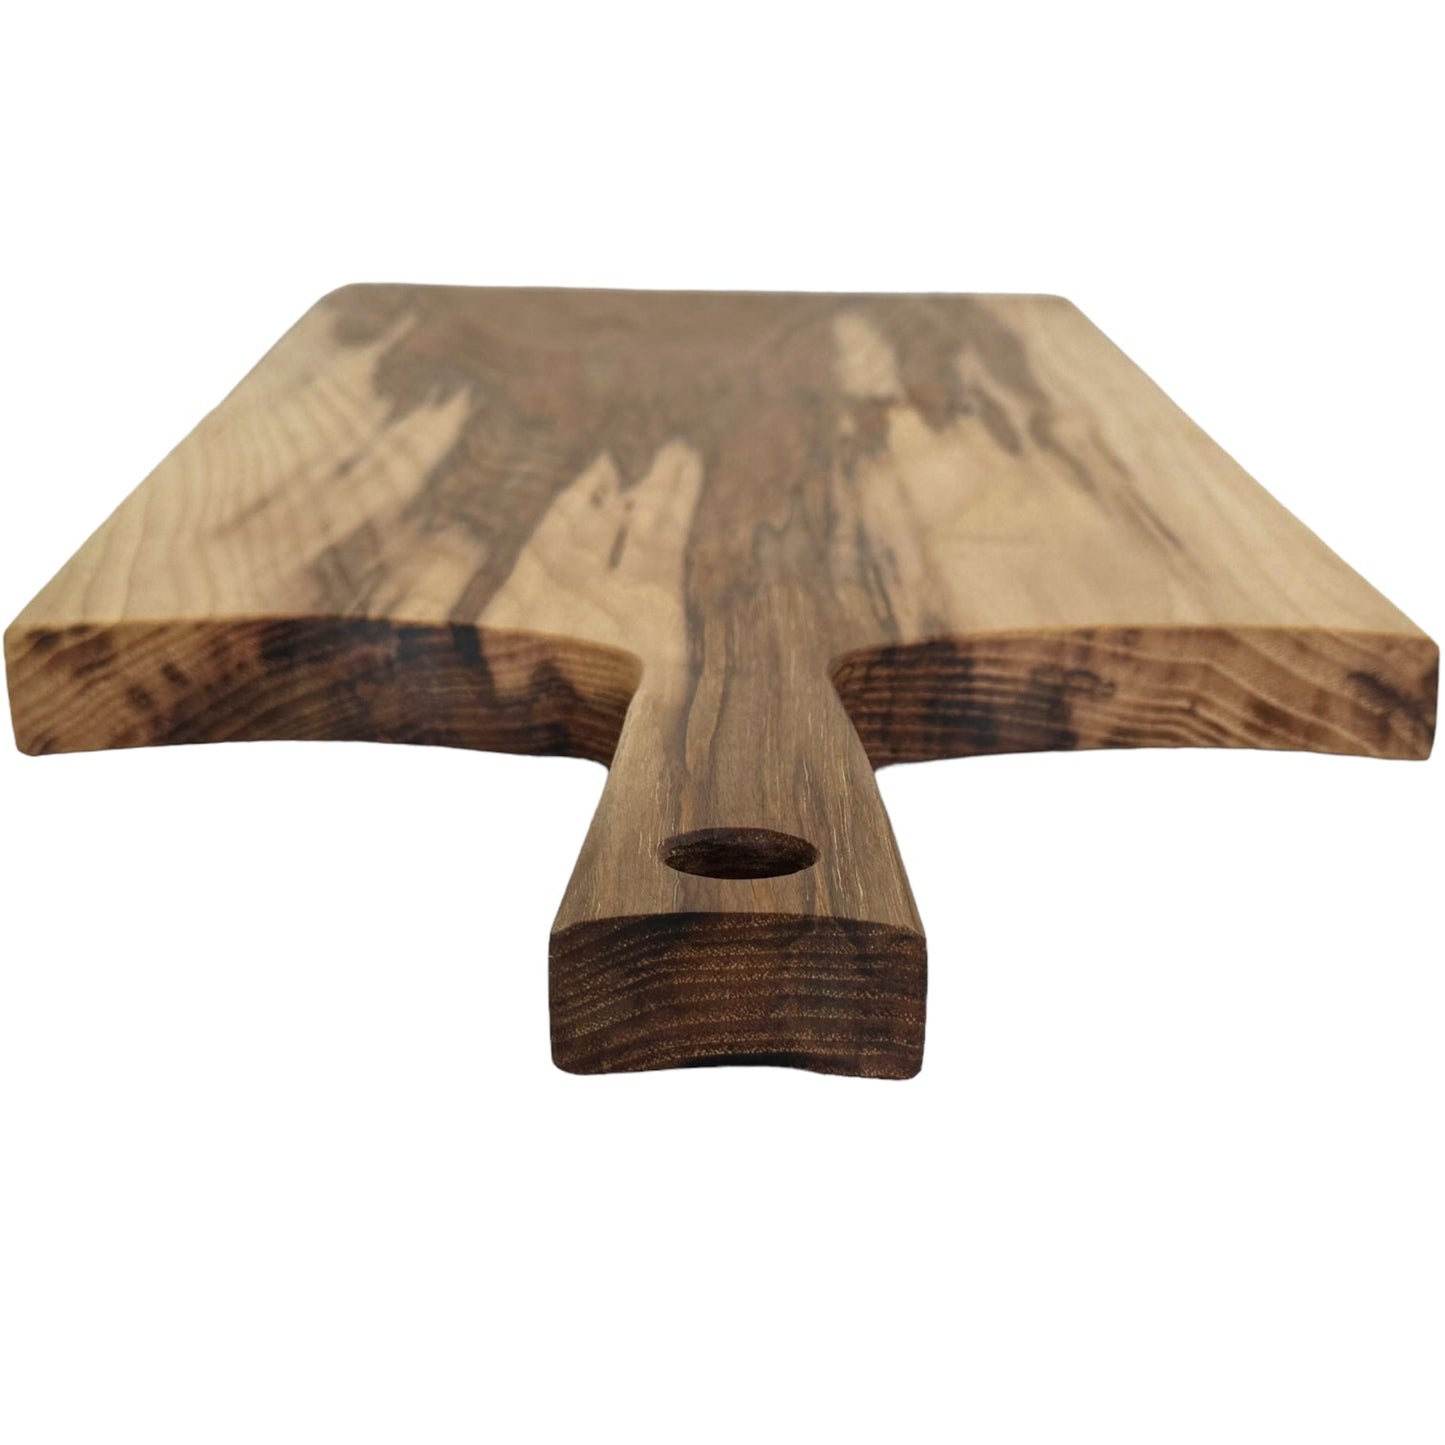 Rustic Handmade Wooden Charcuterie Boards - RTS hickory top of handle detail view